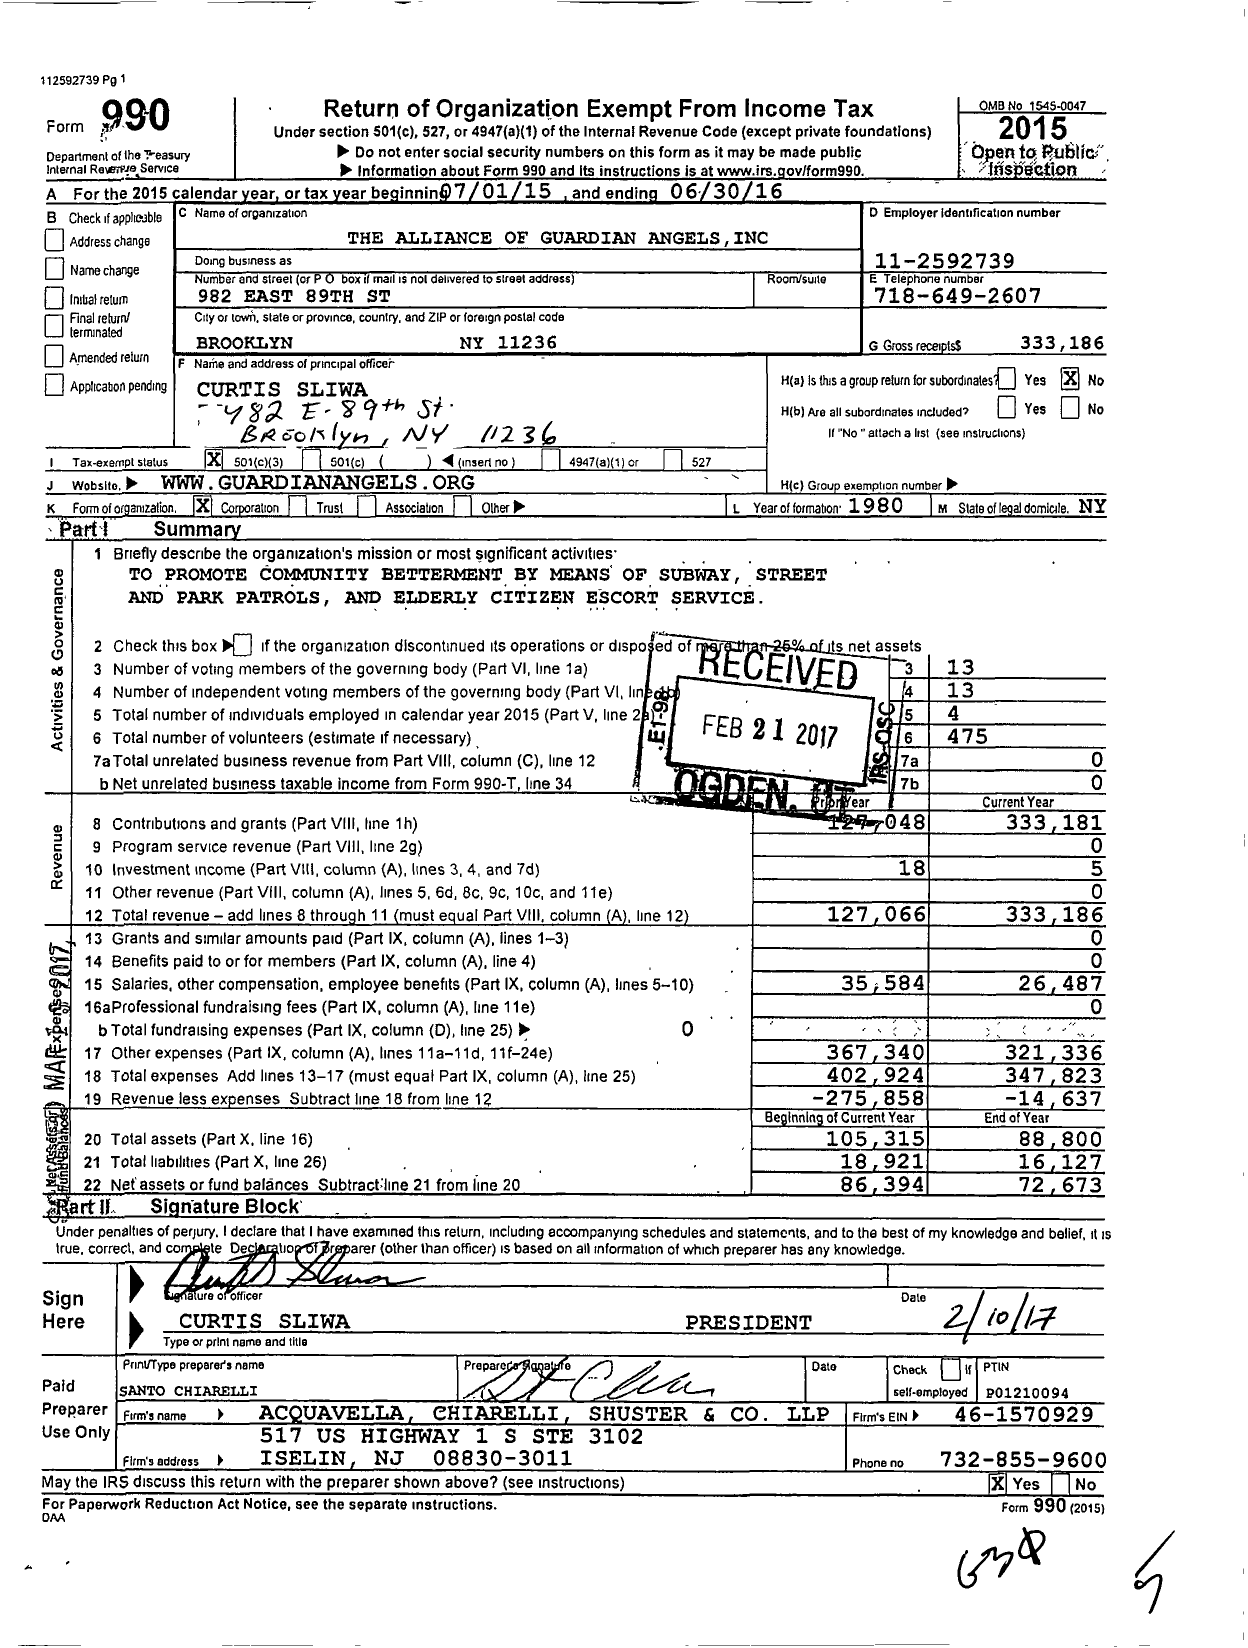 Image of first page of 2015 Form 990 for Alliance of Guardian Angels